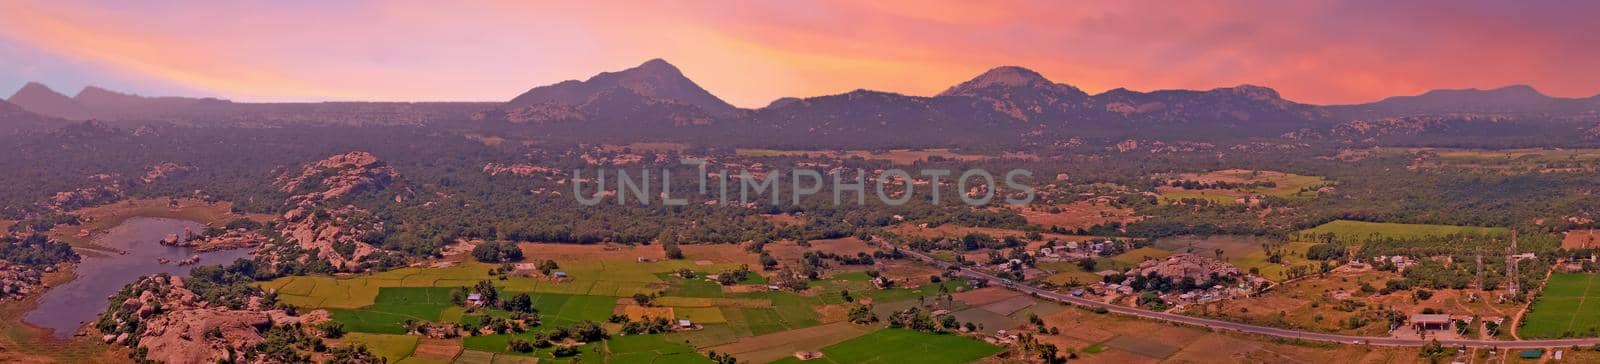 Panoramic view from Gingee Fort, Thiruvannamalai in Tamil Nadu India at sunset
Known as the "Troy of the East" by the British, Gingee Fort rises out of the Tamilian plains. Lying in Villupuram District of Tamil Nadu in India